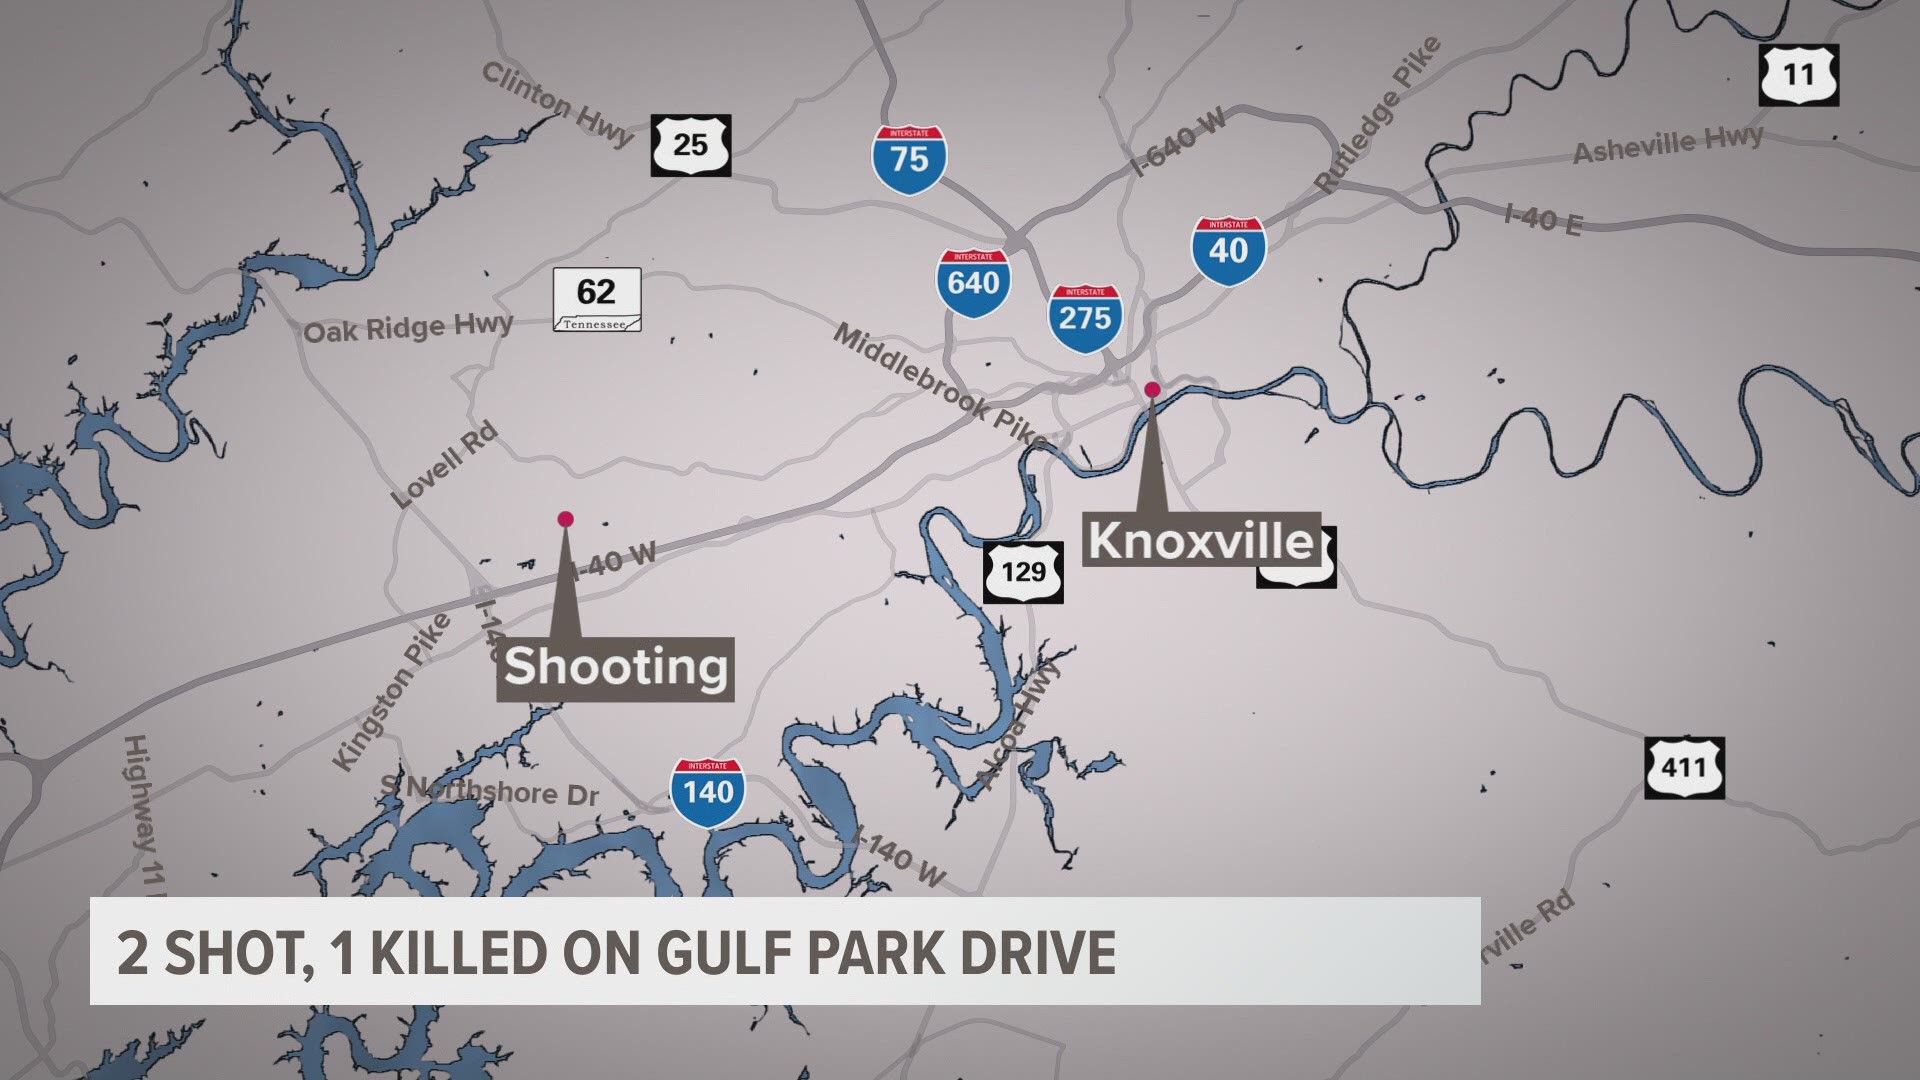 Officials say the shooting appears to be domestic-related.